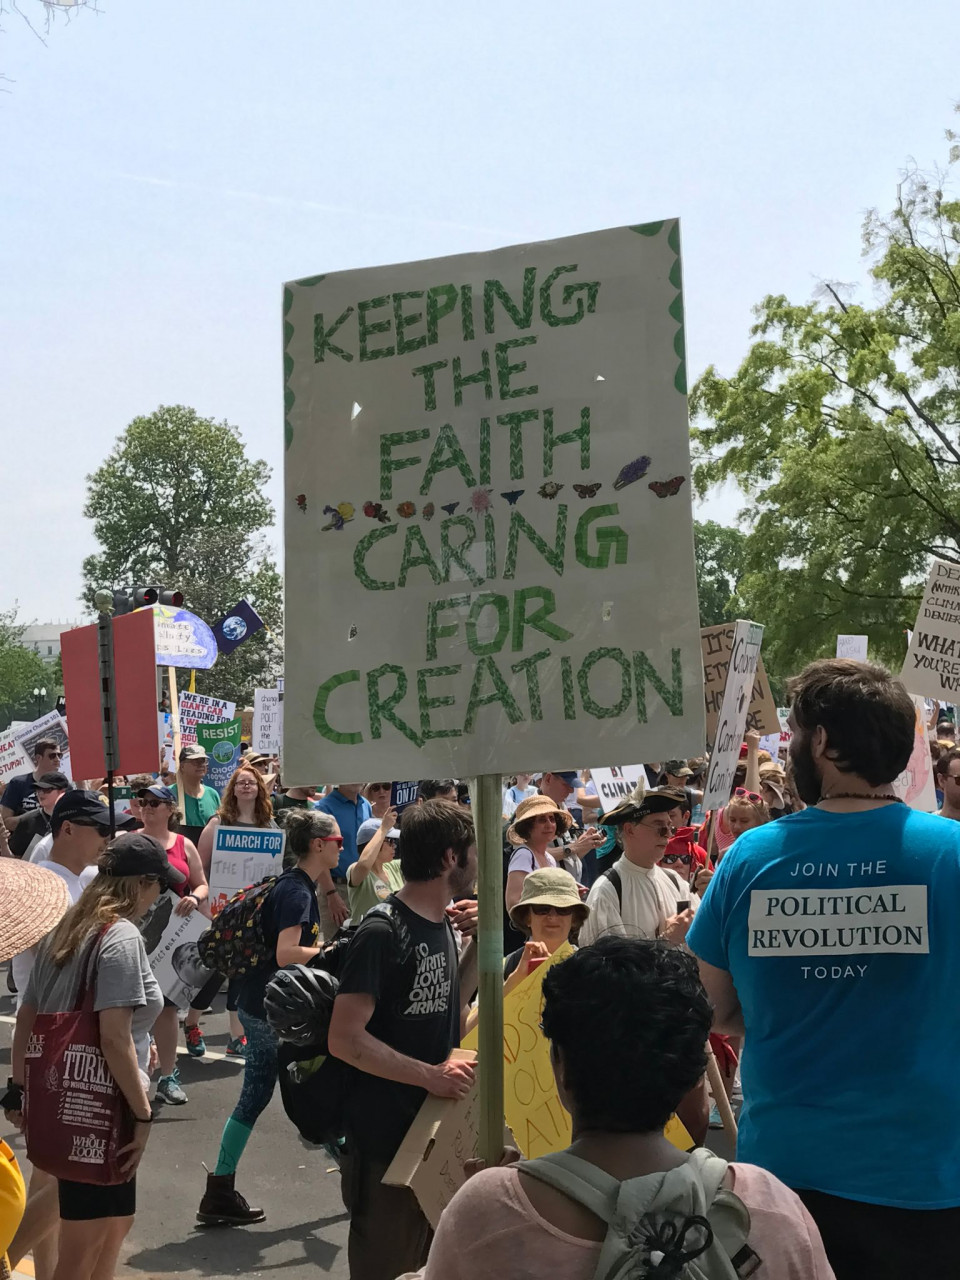 People's Climate March 2017 - Keeping the Faith, Caring for Creation